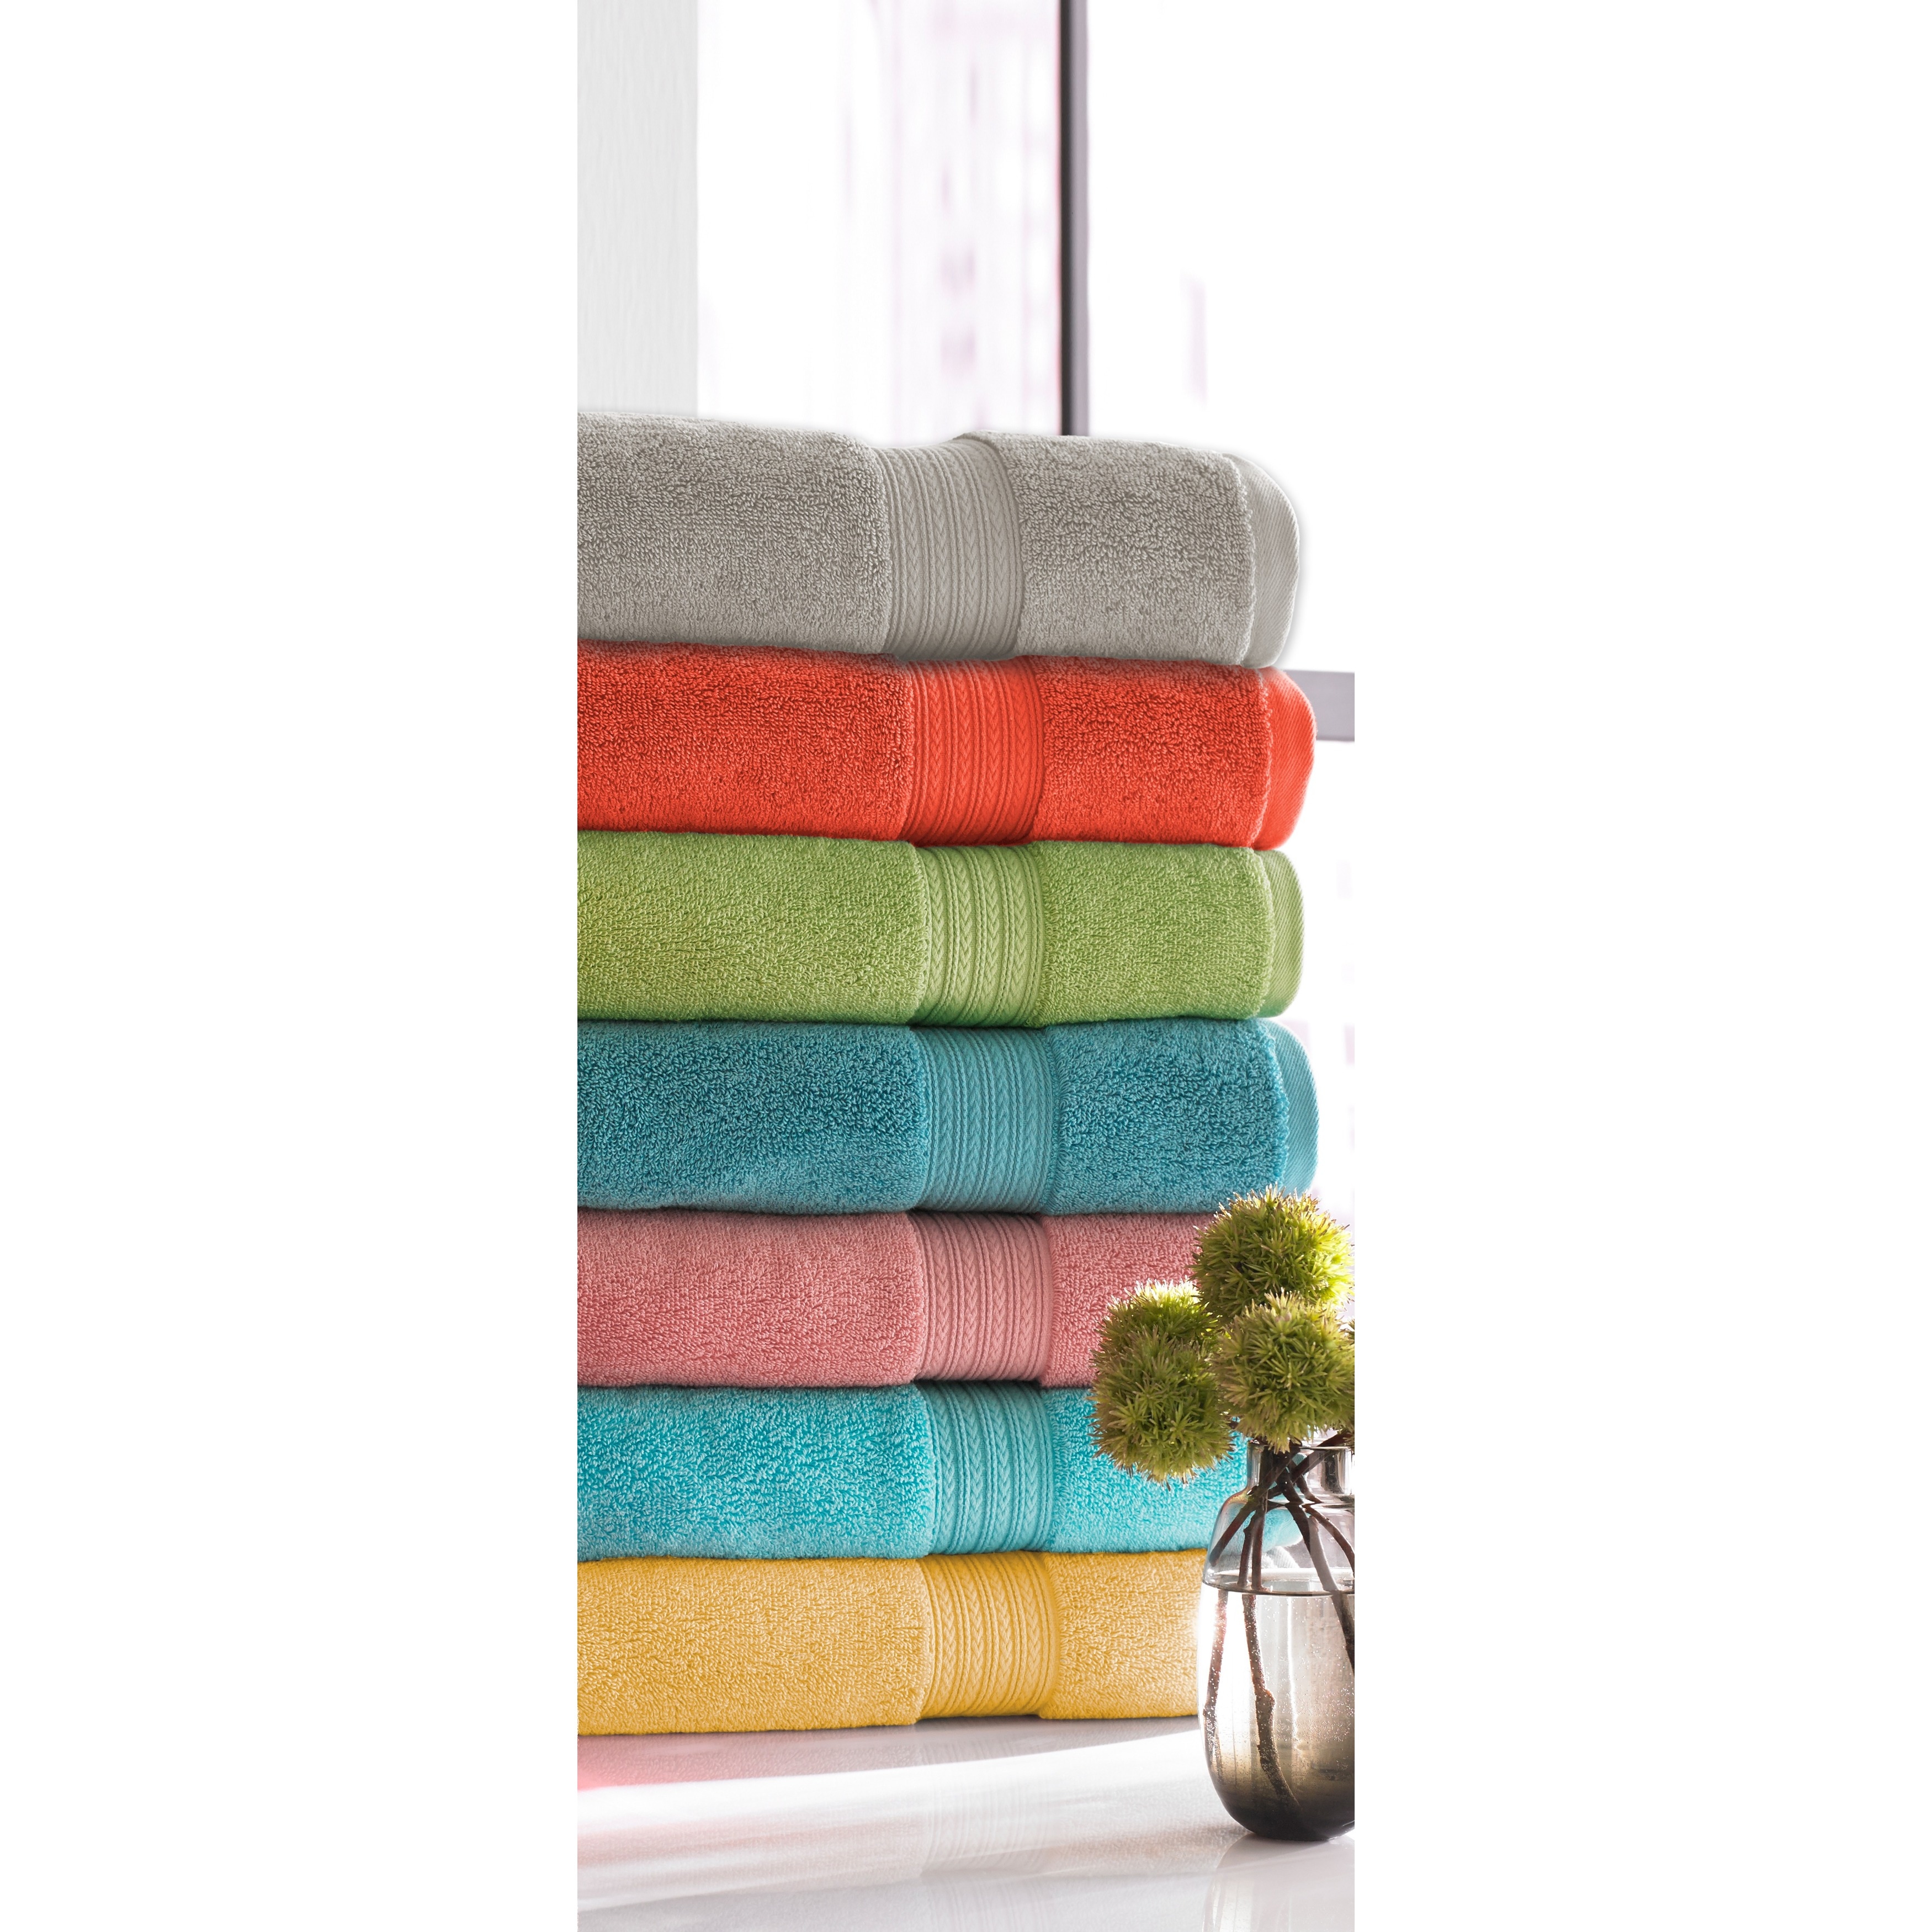 https://ak1.ostkcdn.com/images/products/9033818/Egyptian-Cotton-Brights-Collection-6-piece-Towel-Set-86a6a439-19fa-4837-a151-64f8a7d0871d.jpg